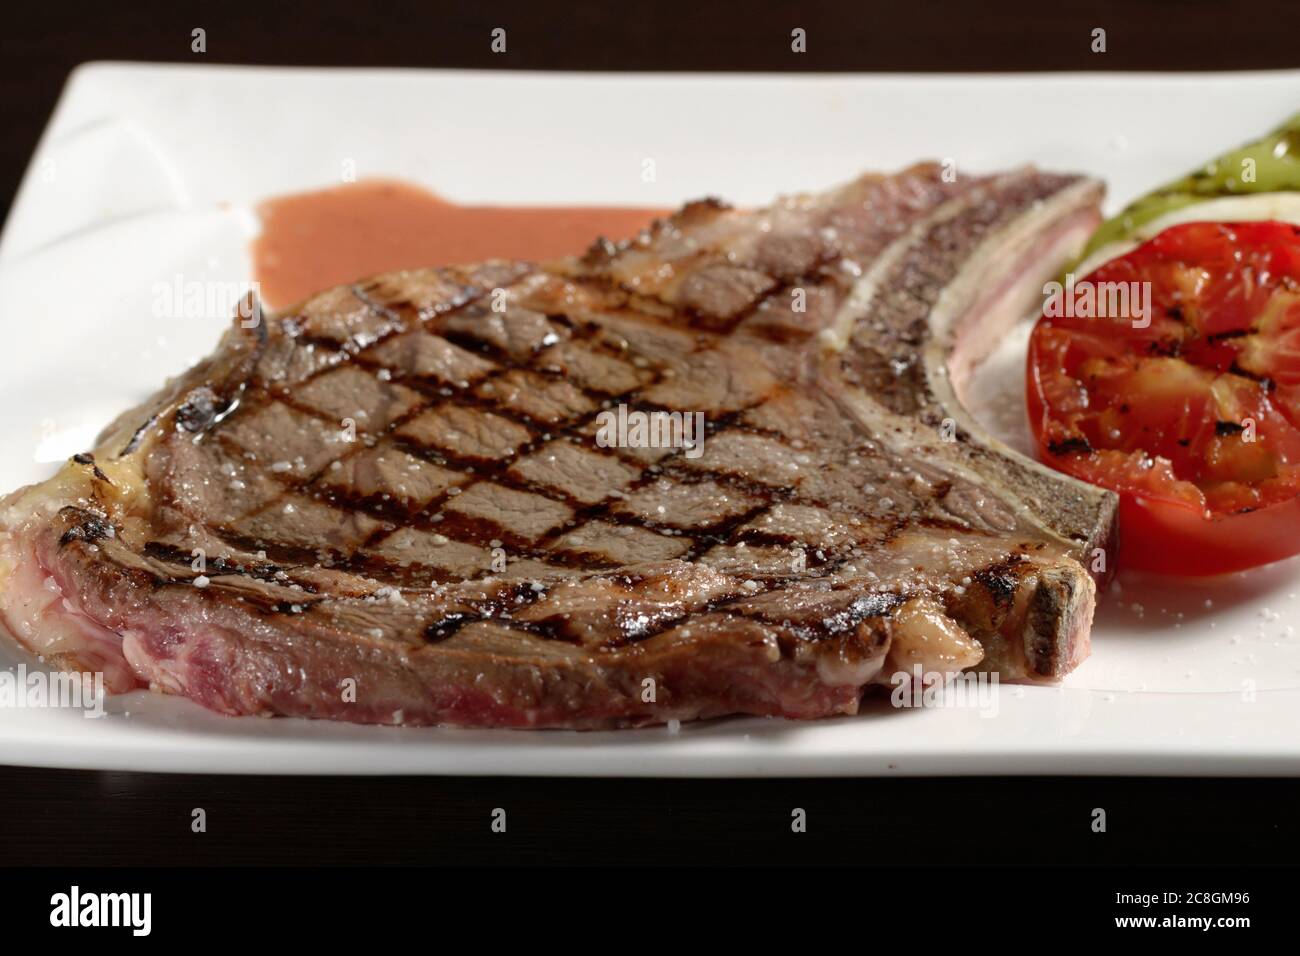 Cowboy beef steak with grilled vegetables close-up. Photos for restaurant and cafe menus Stock Photo